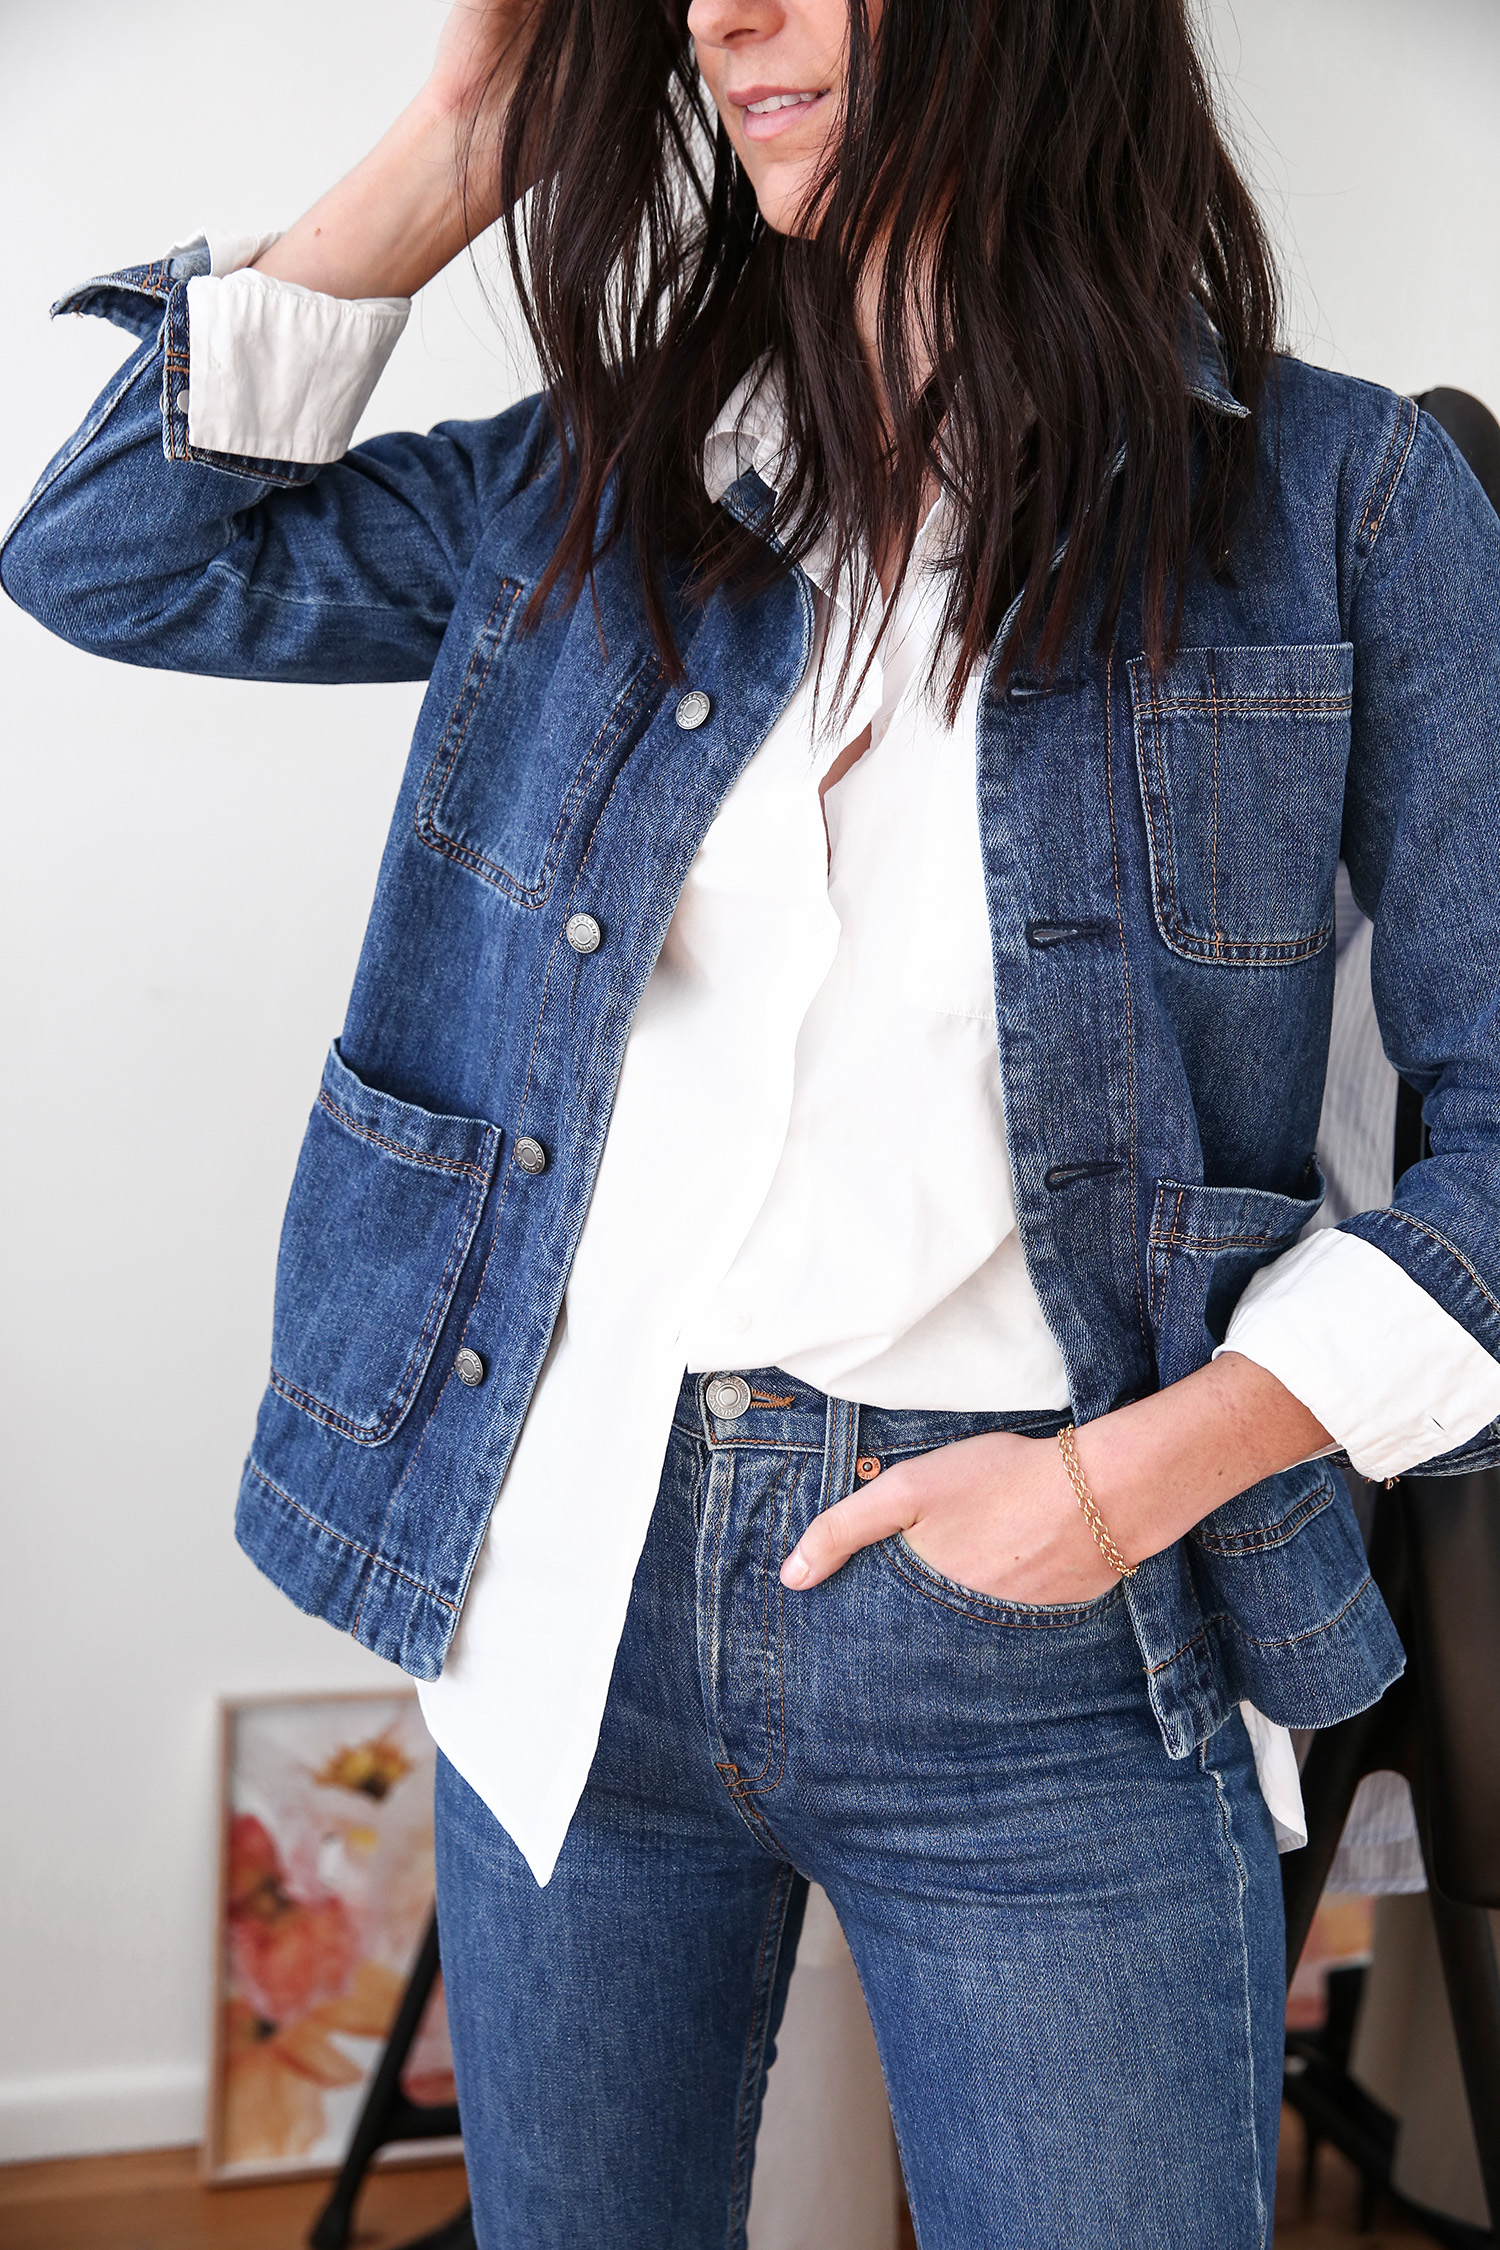 Three reasons why you need a denim jacket in your wardrobe